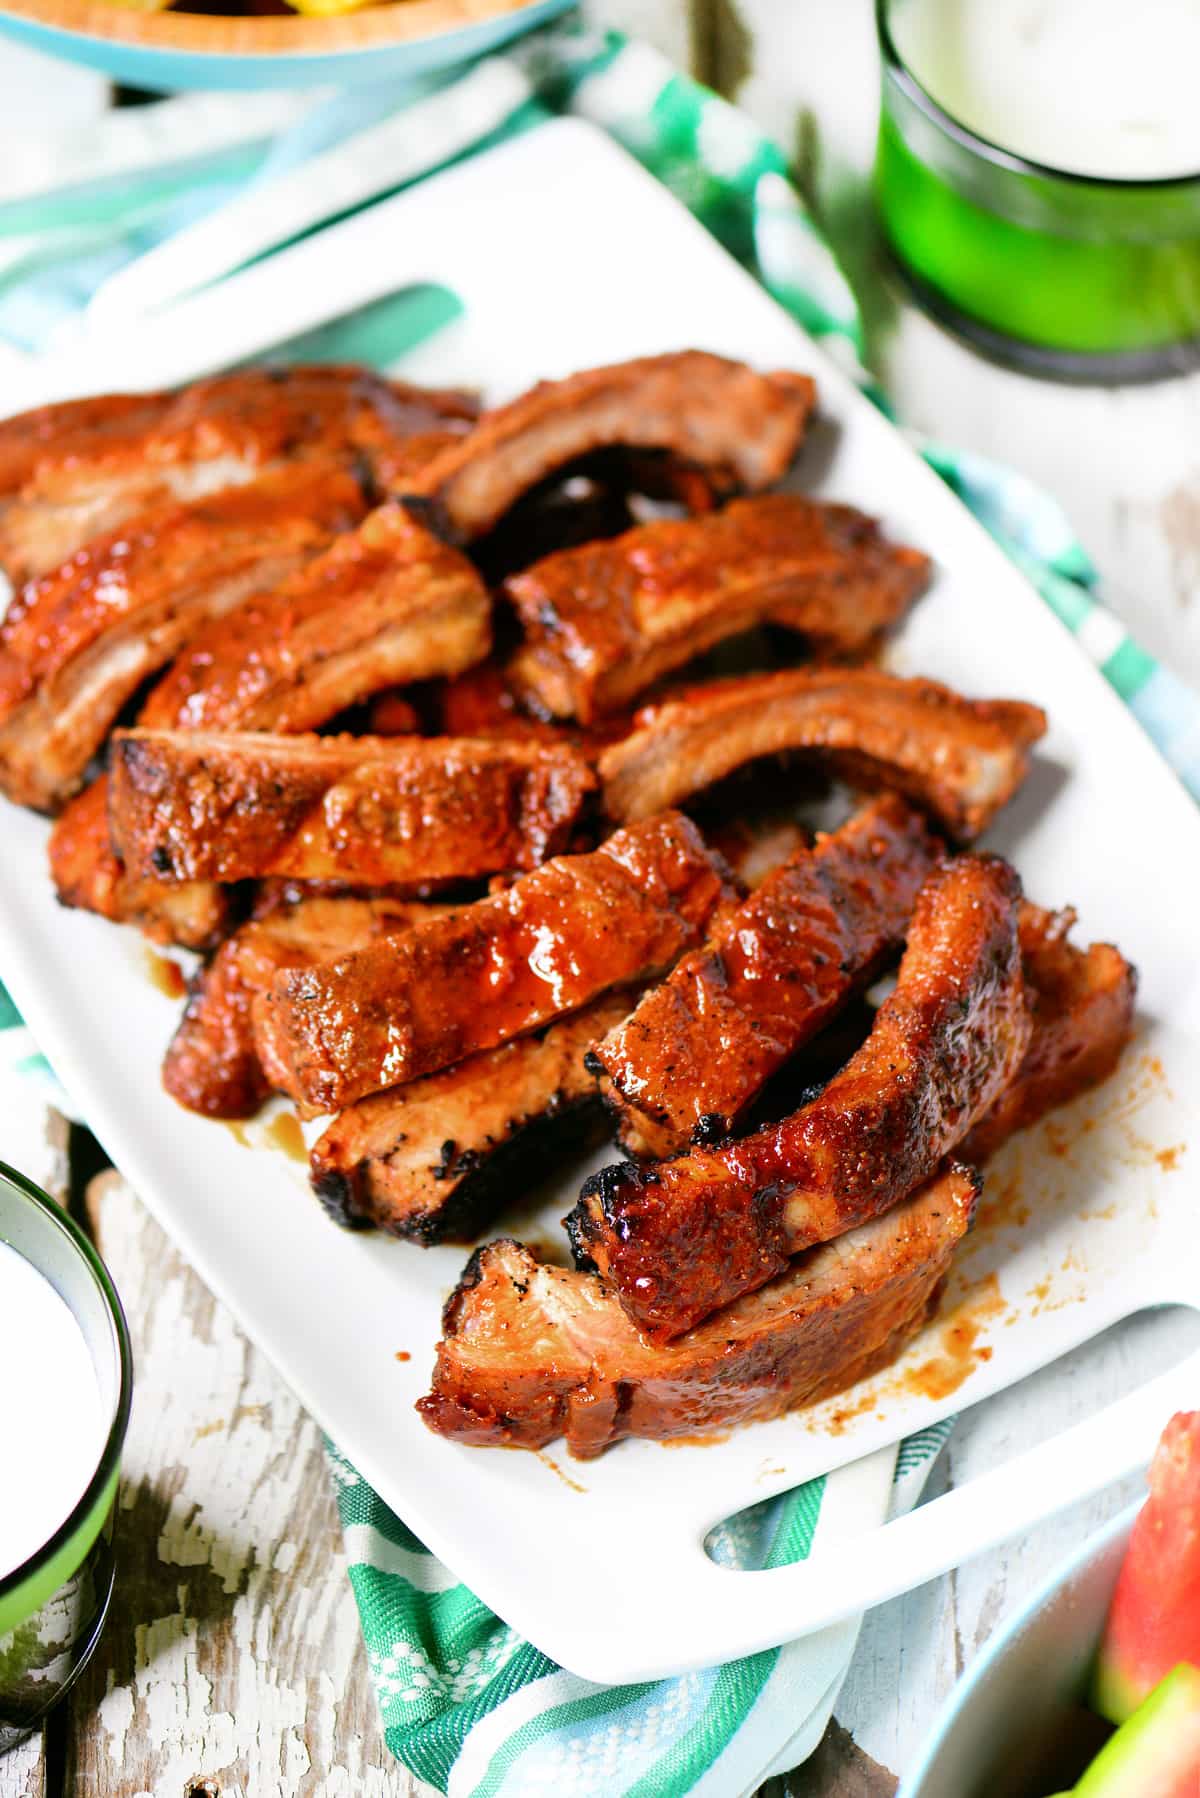 Grilled Barbecue Ribs